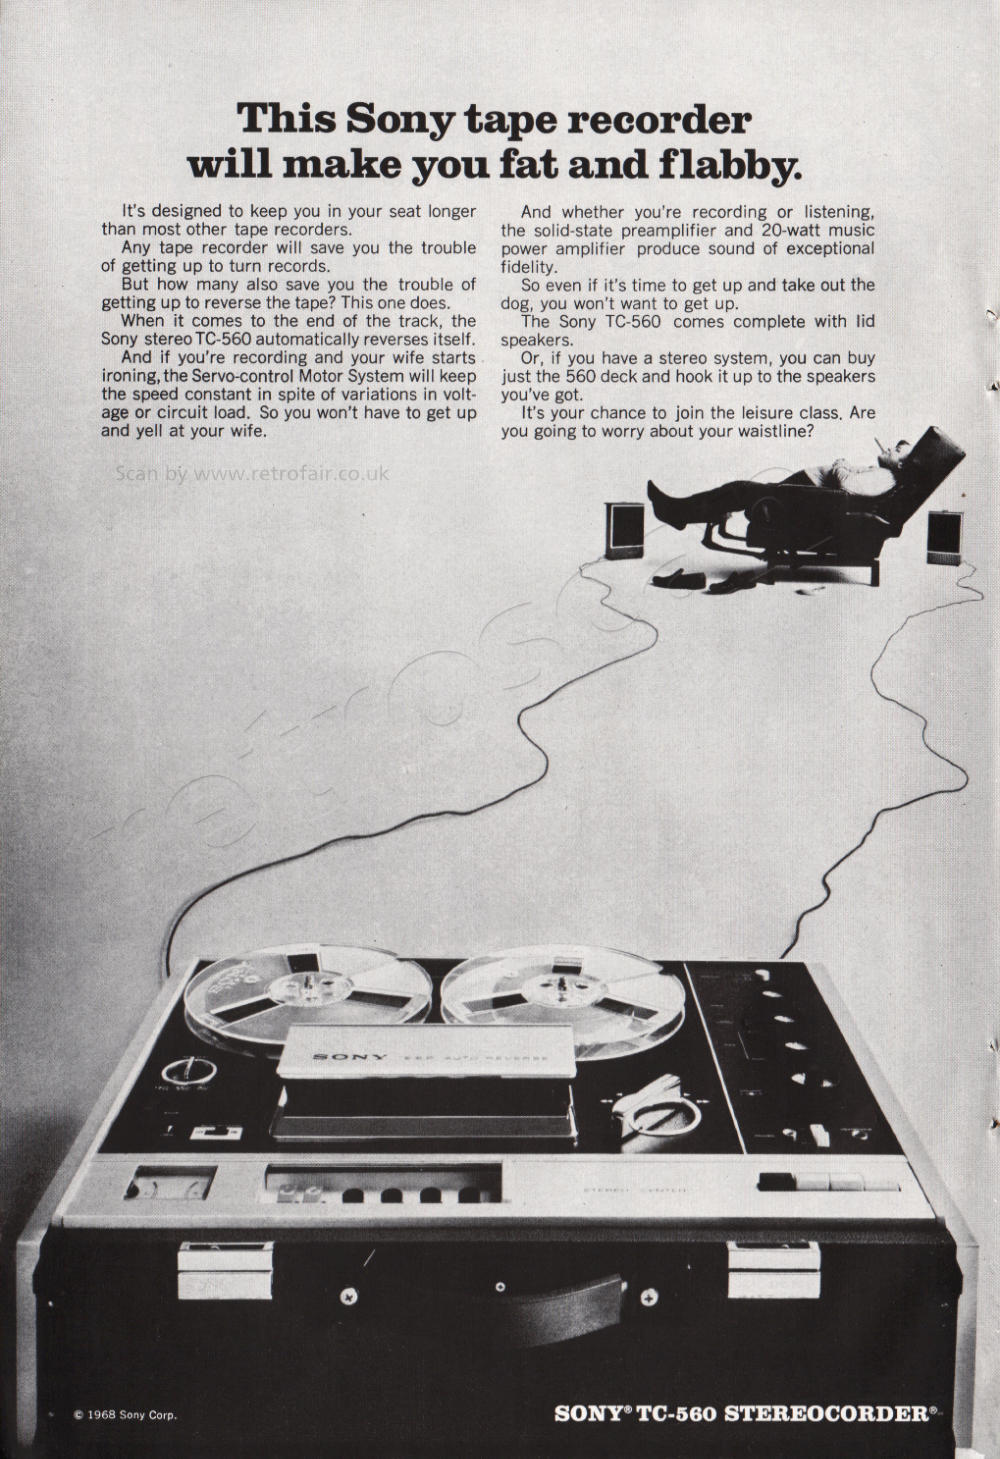  1968 Sony Tape Recorders - unframed vintage ad